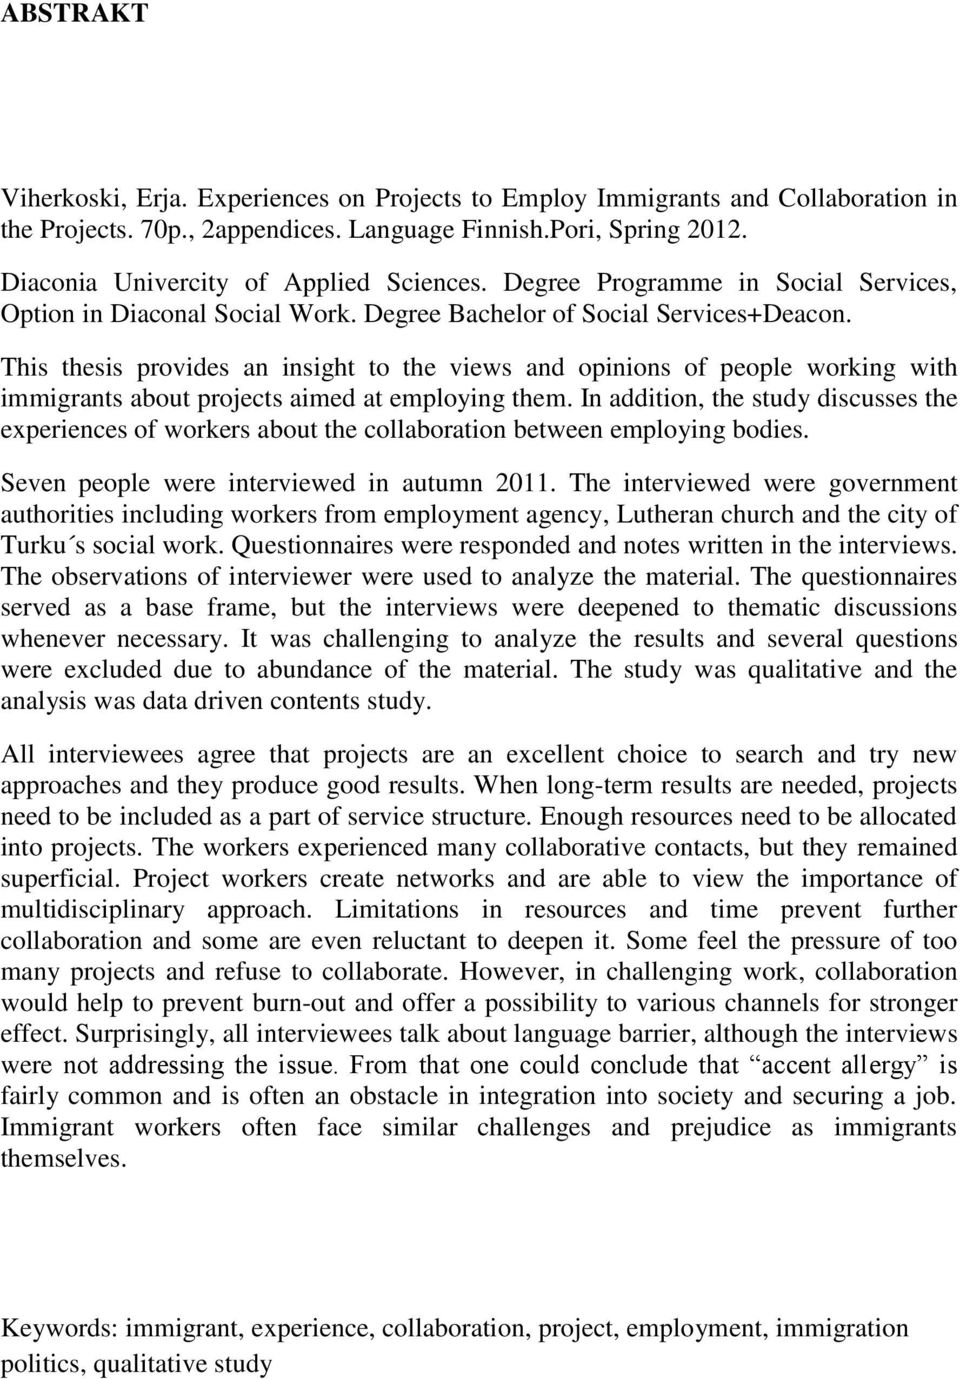 This thesis provides an insight to the views and opinions of people working with immigrants about projects aimed at employing them.